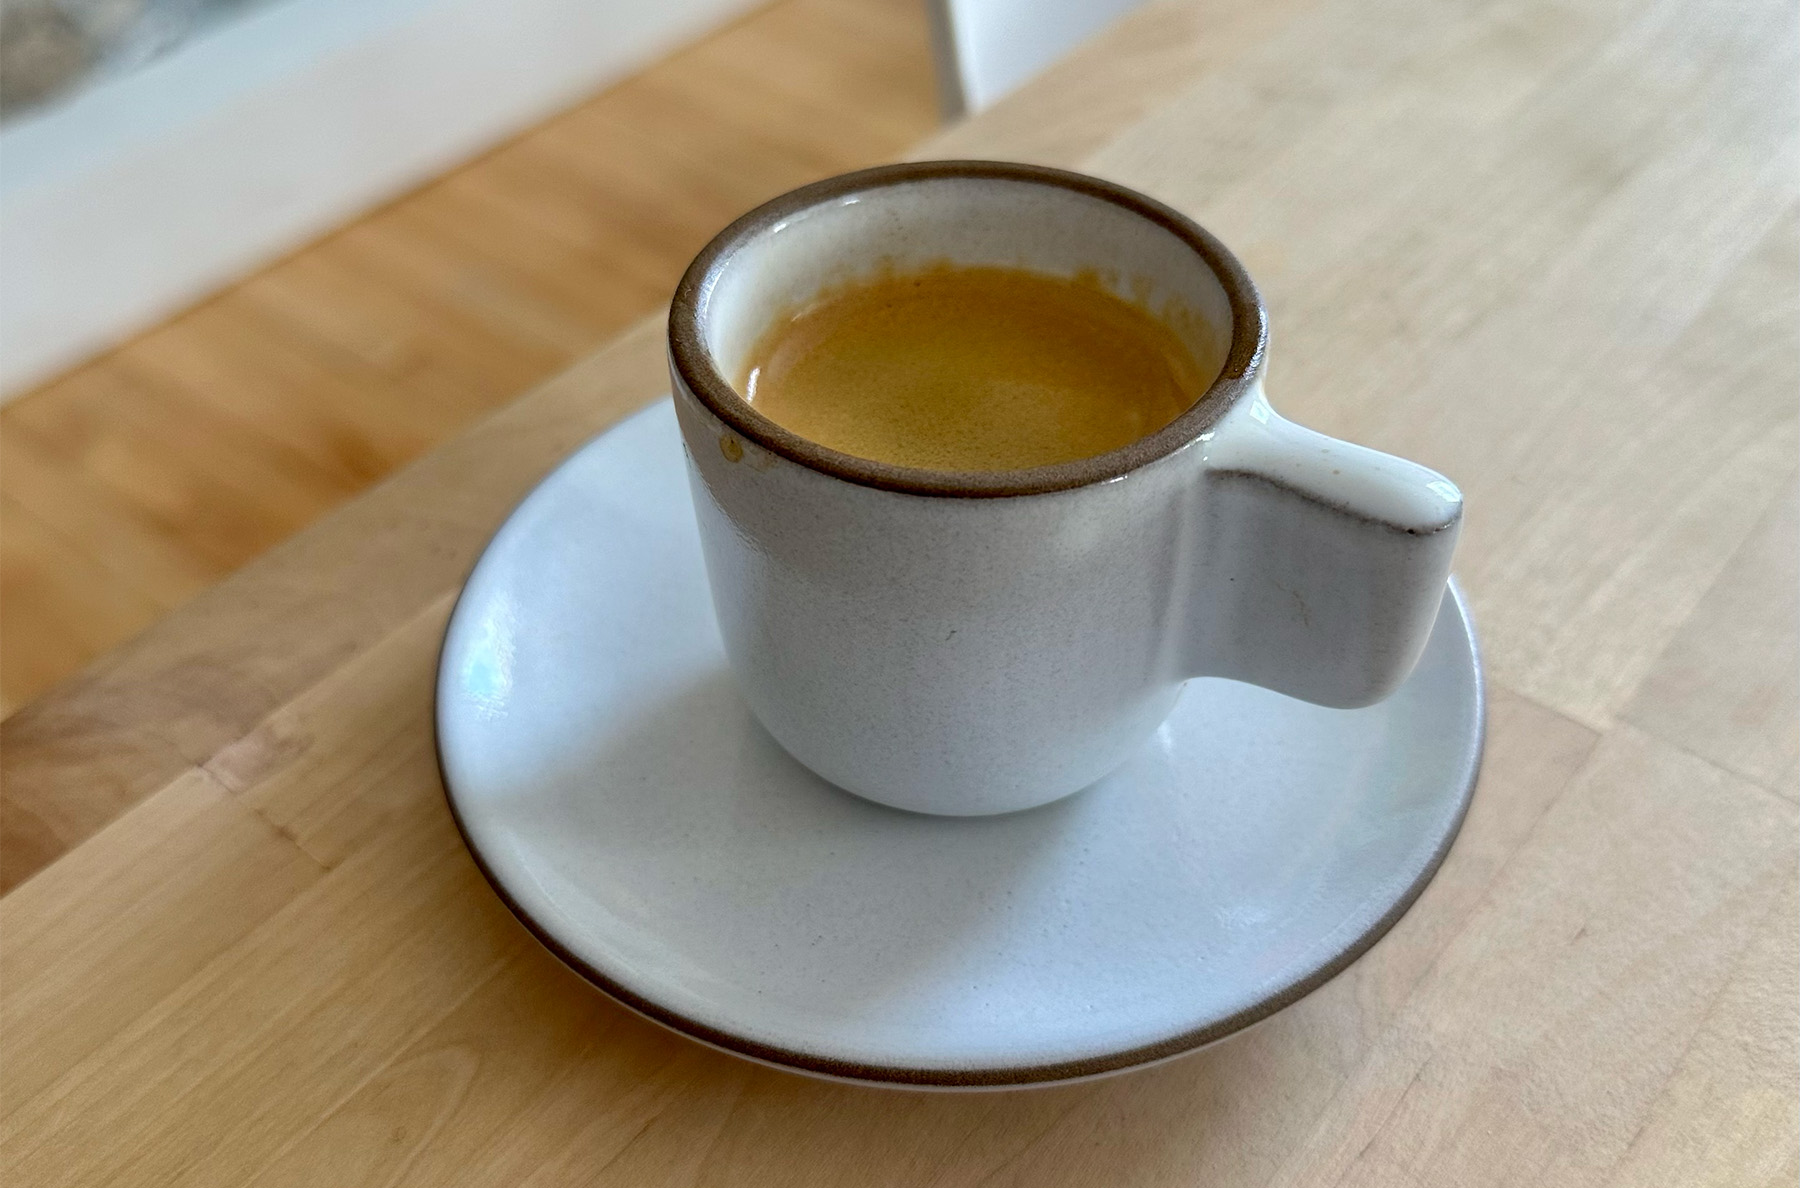 What’s the best way to make coffee? Strong opinions abound, and our editor-in-chief is currently trying to figure it all out. So we are launching this CRAFTED mini series on coffee gear to try to gain some clarity on the topic. See what you think, and let us know what you recommend!